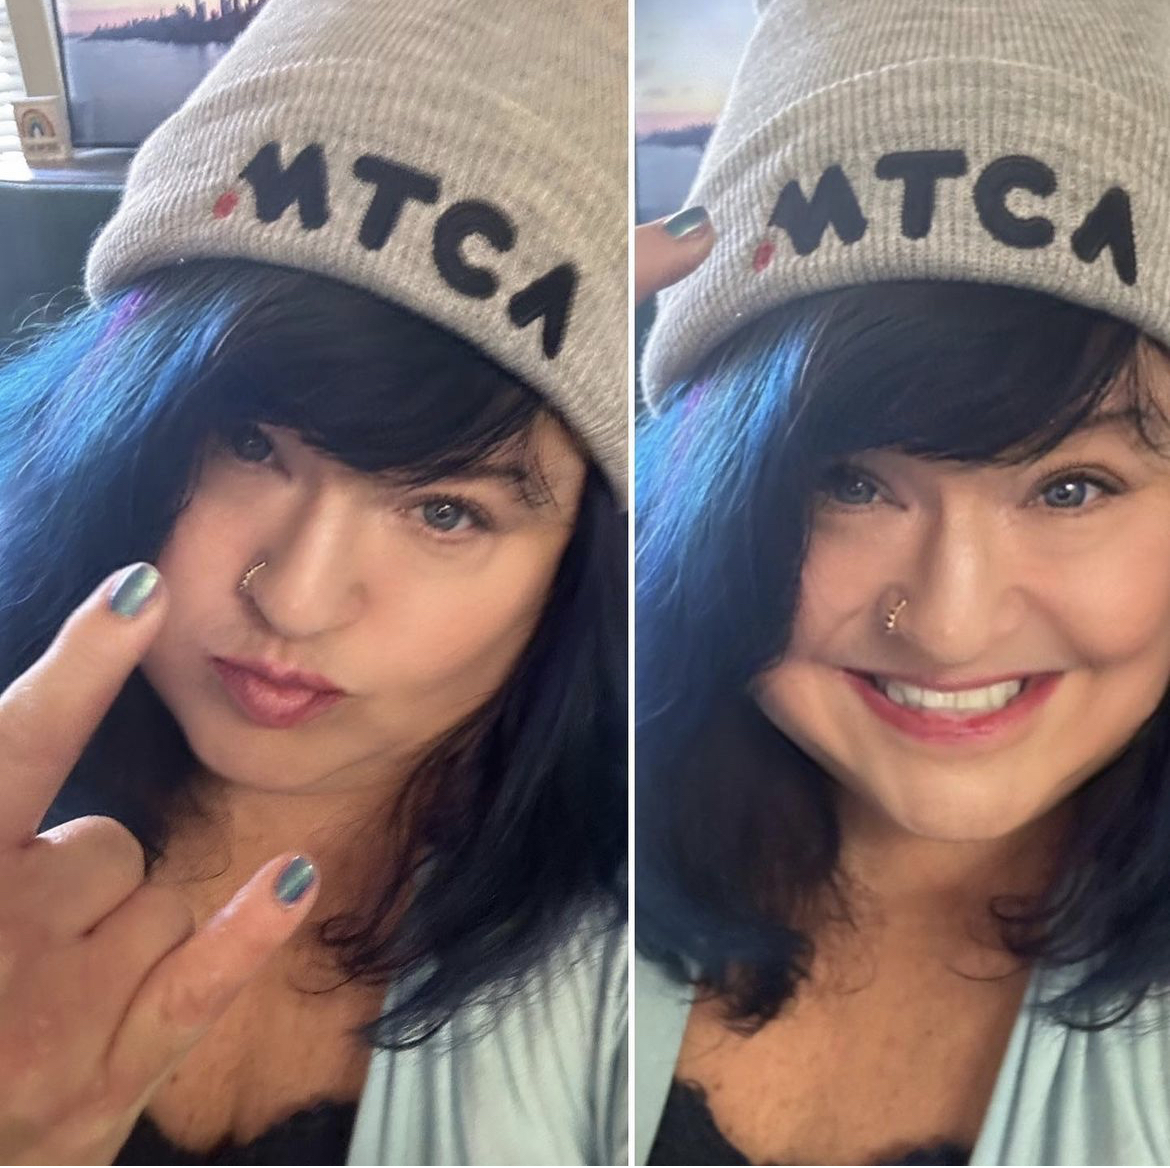 LOOK AT OUR AMAZING FOUNDER ROCKING HER MTCA MERCH!!! Ellen, you look so good! MTCA Fam Forever ❤️❤️❤️

Check out the link in bio for all MTCA merch!

#merch #mtcamerch #collegeauditionprep #collegeauditions #theatercollege #mtcafam #mtcaknows